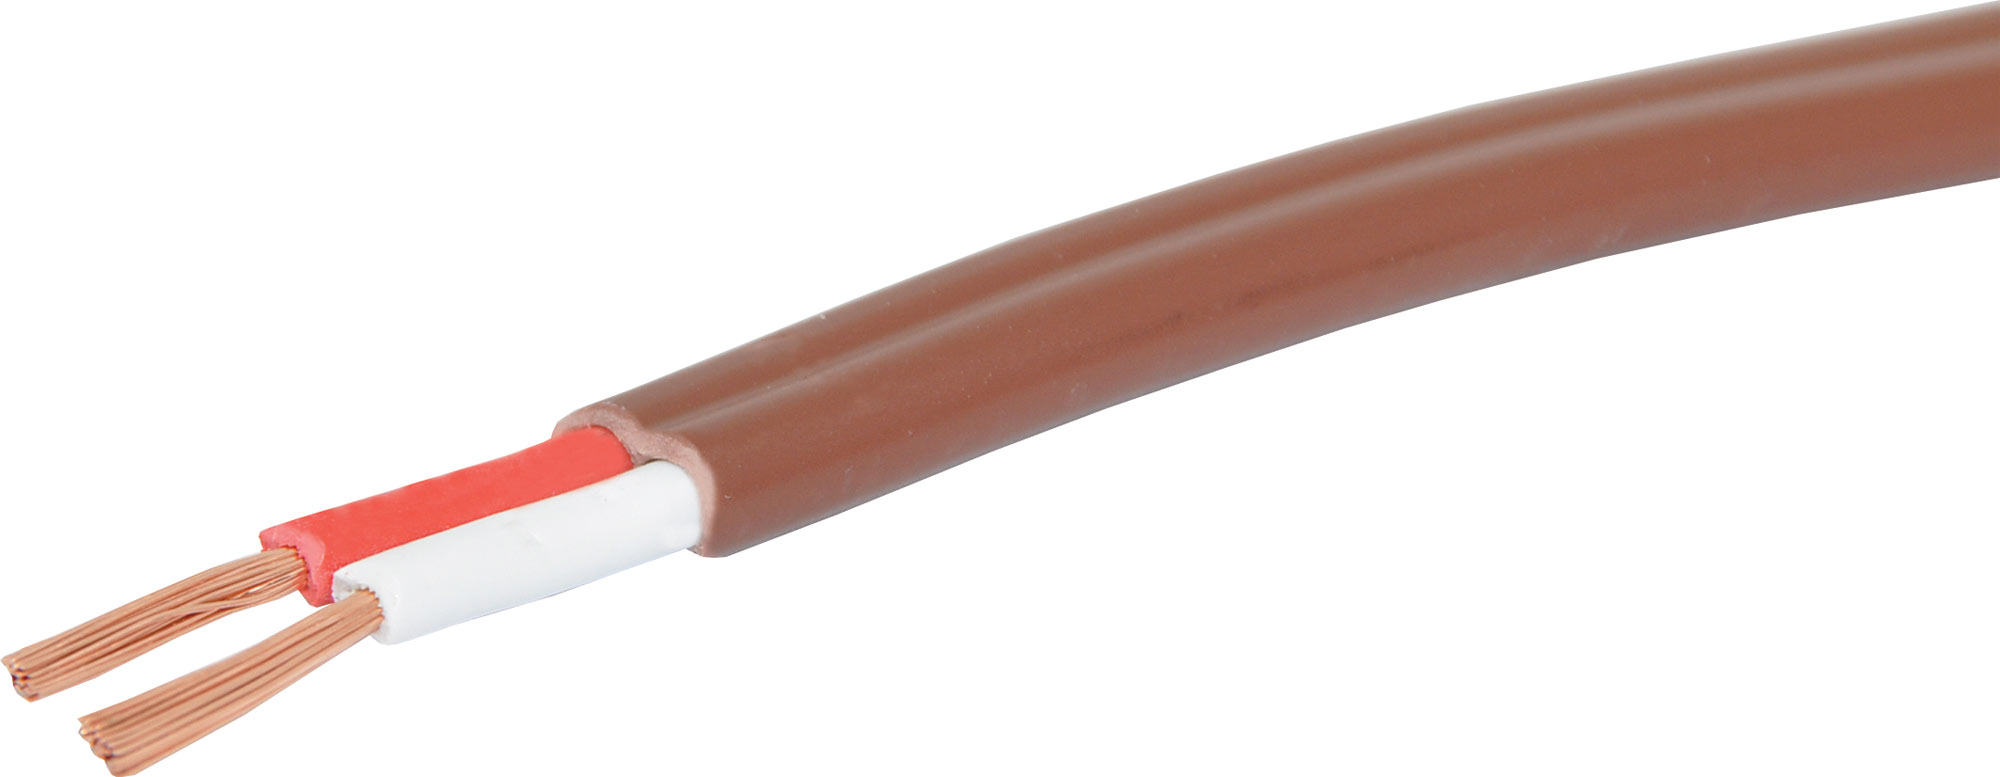 FIG8 CABLE 24/0.20 2 CORE UNSCREENED PVC SHEATH 250M BROWN